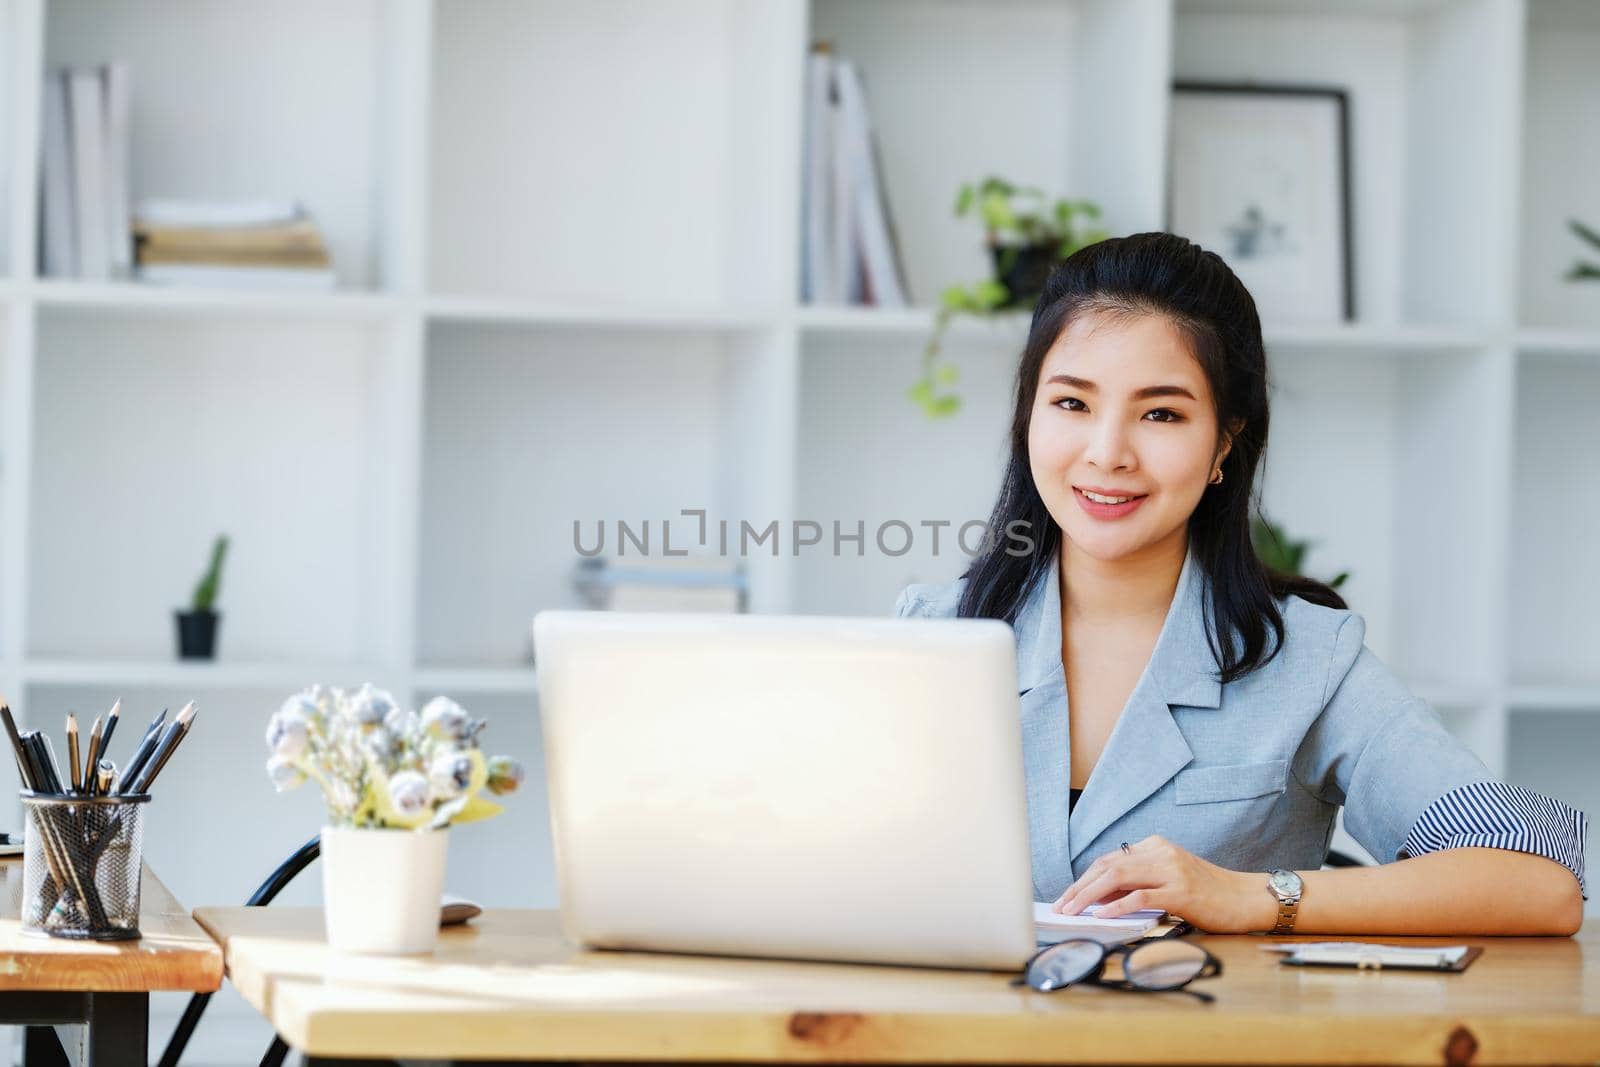 An Asian entrepreneur or businesswoman shows a smiling face while working with using computer on a wooden table. by Manastrong